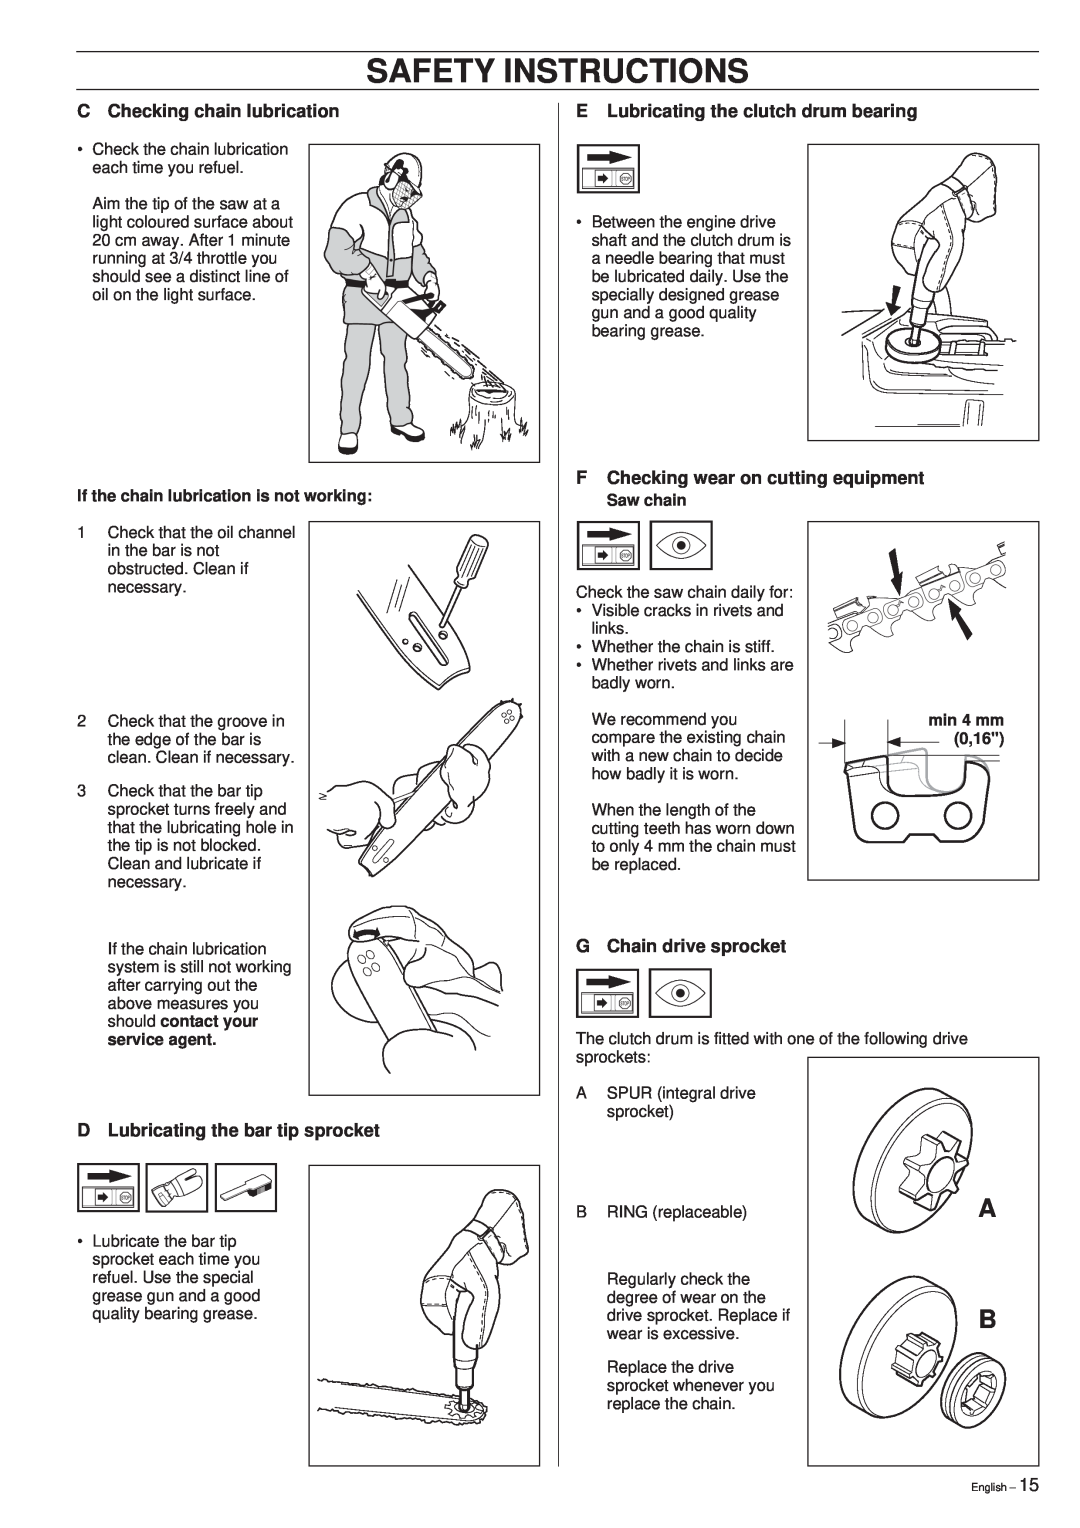 Husqvarna 261 manual Safety Instructions, C Checking chain lubrication, E Lubricating the clutch drum bearing 